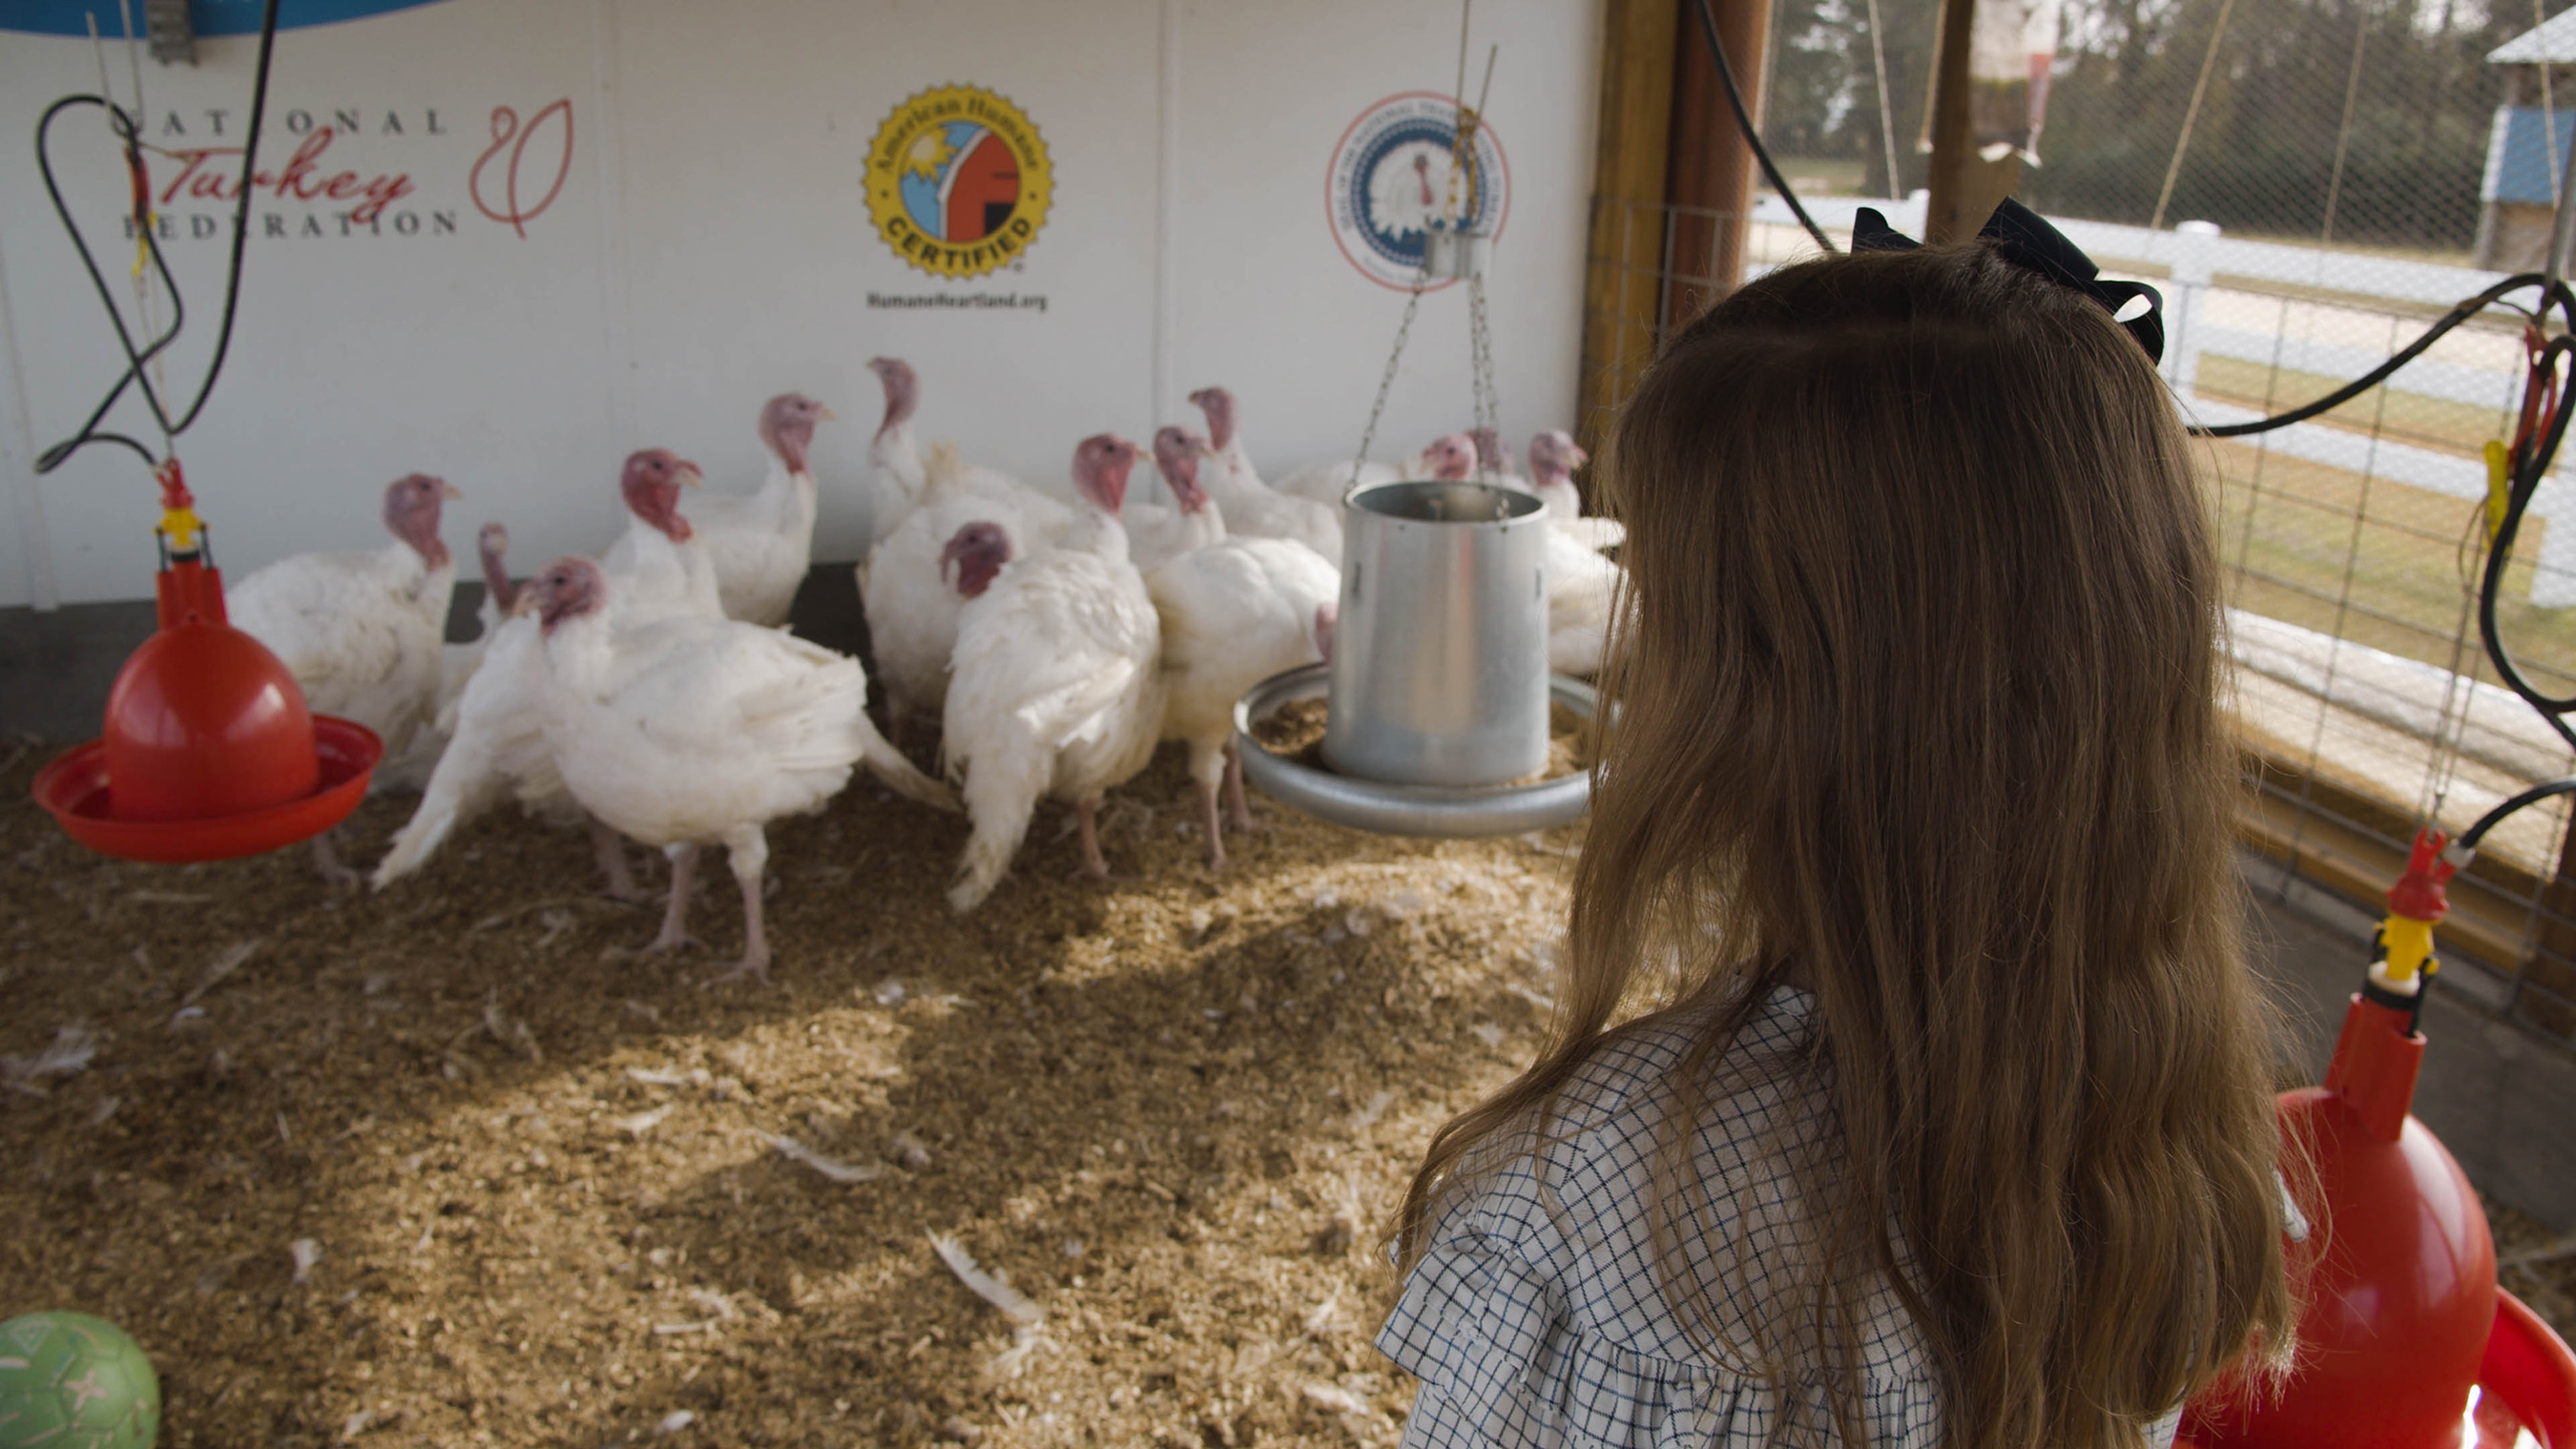 The 2019 Presidential Flock was raised by Butterball contract grower, Wellie Jackson, of Clinton, North Carolina. His daughter, Sara-John, checks on the flock on the farm.